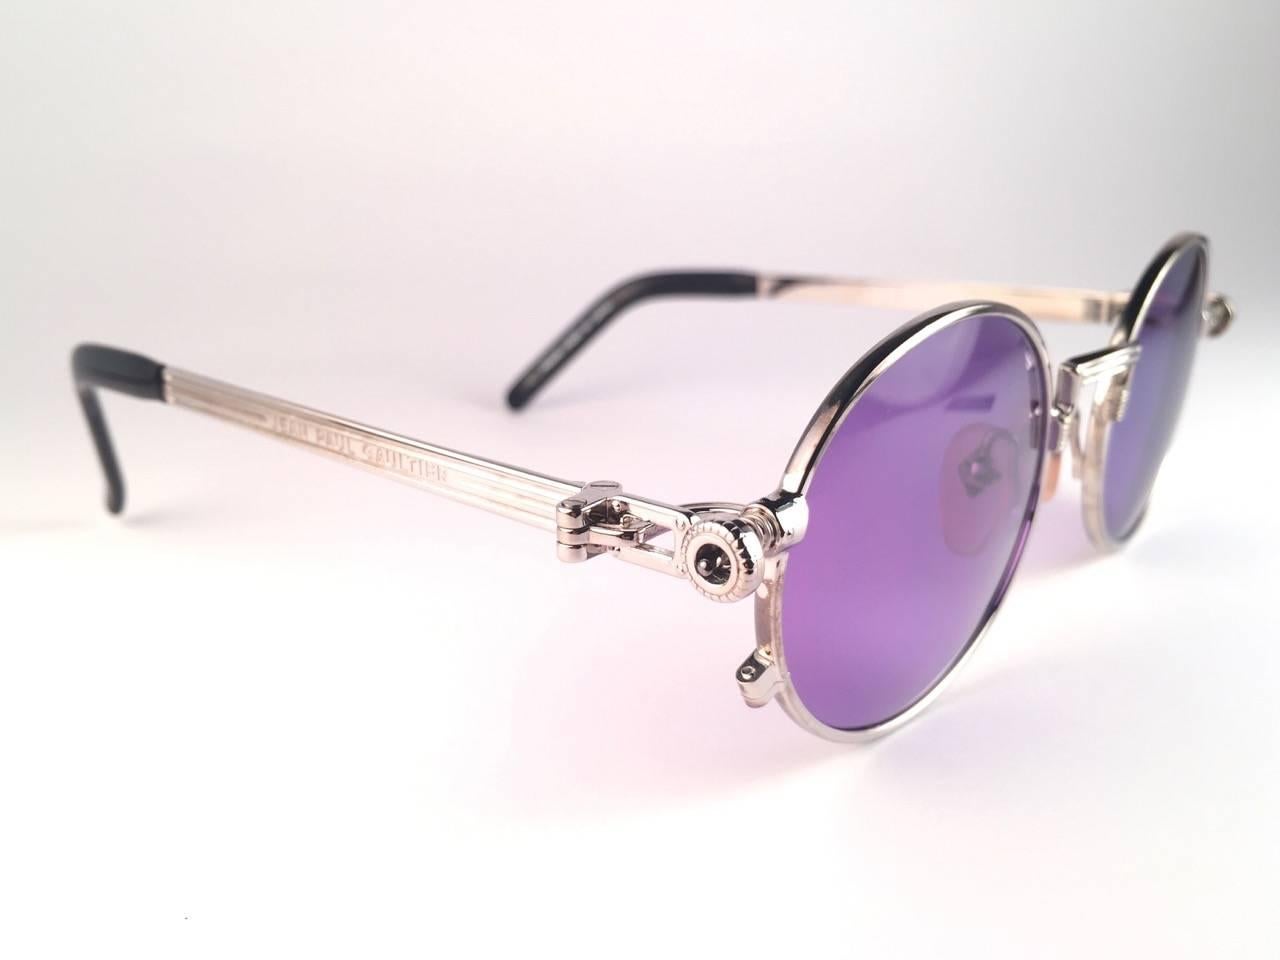 New Jean Paul Gaultier 56 4178 round silver metal frame.  Flat dark purple lenses that complete a ready to wear JPG look.  Amazing design with strong yet intricate details. Design and produced in the 1990's. New, never worn or displayed. A true